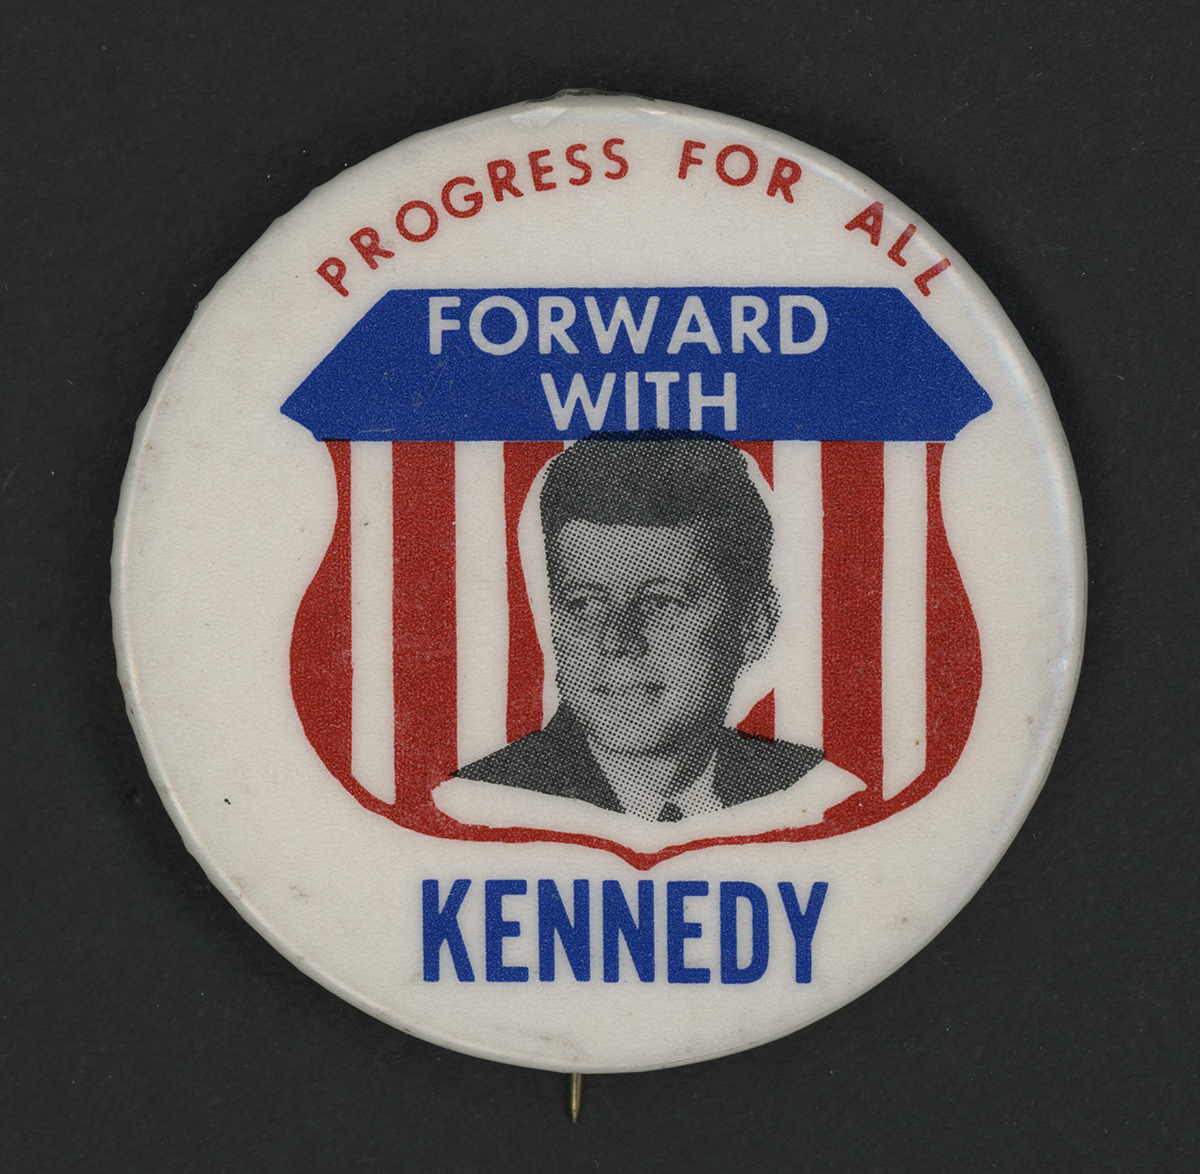 “Progress for All...Forward with Kennedy”